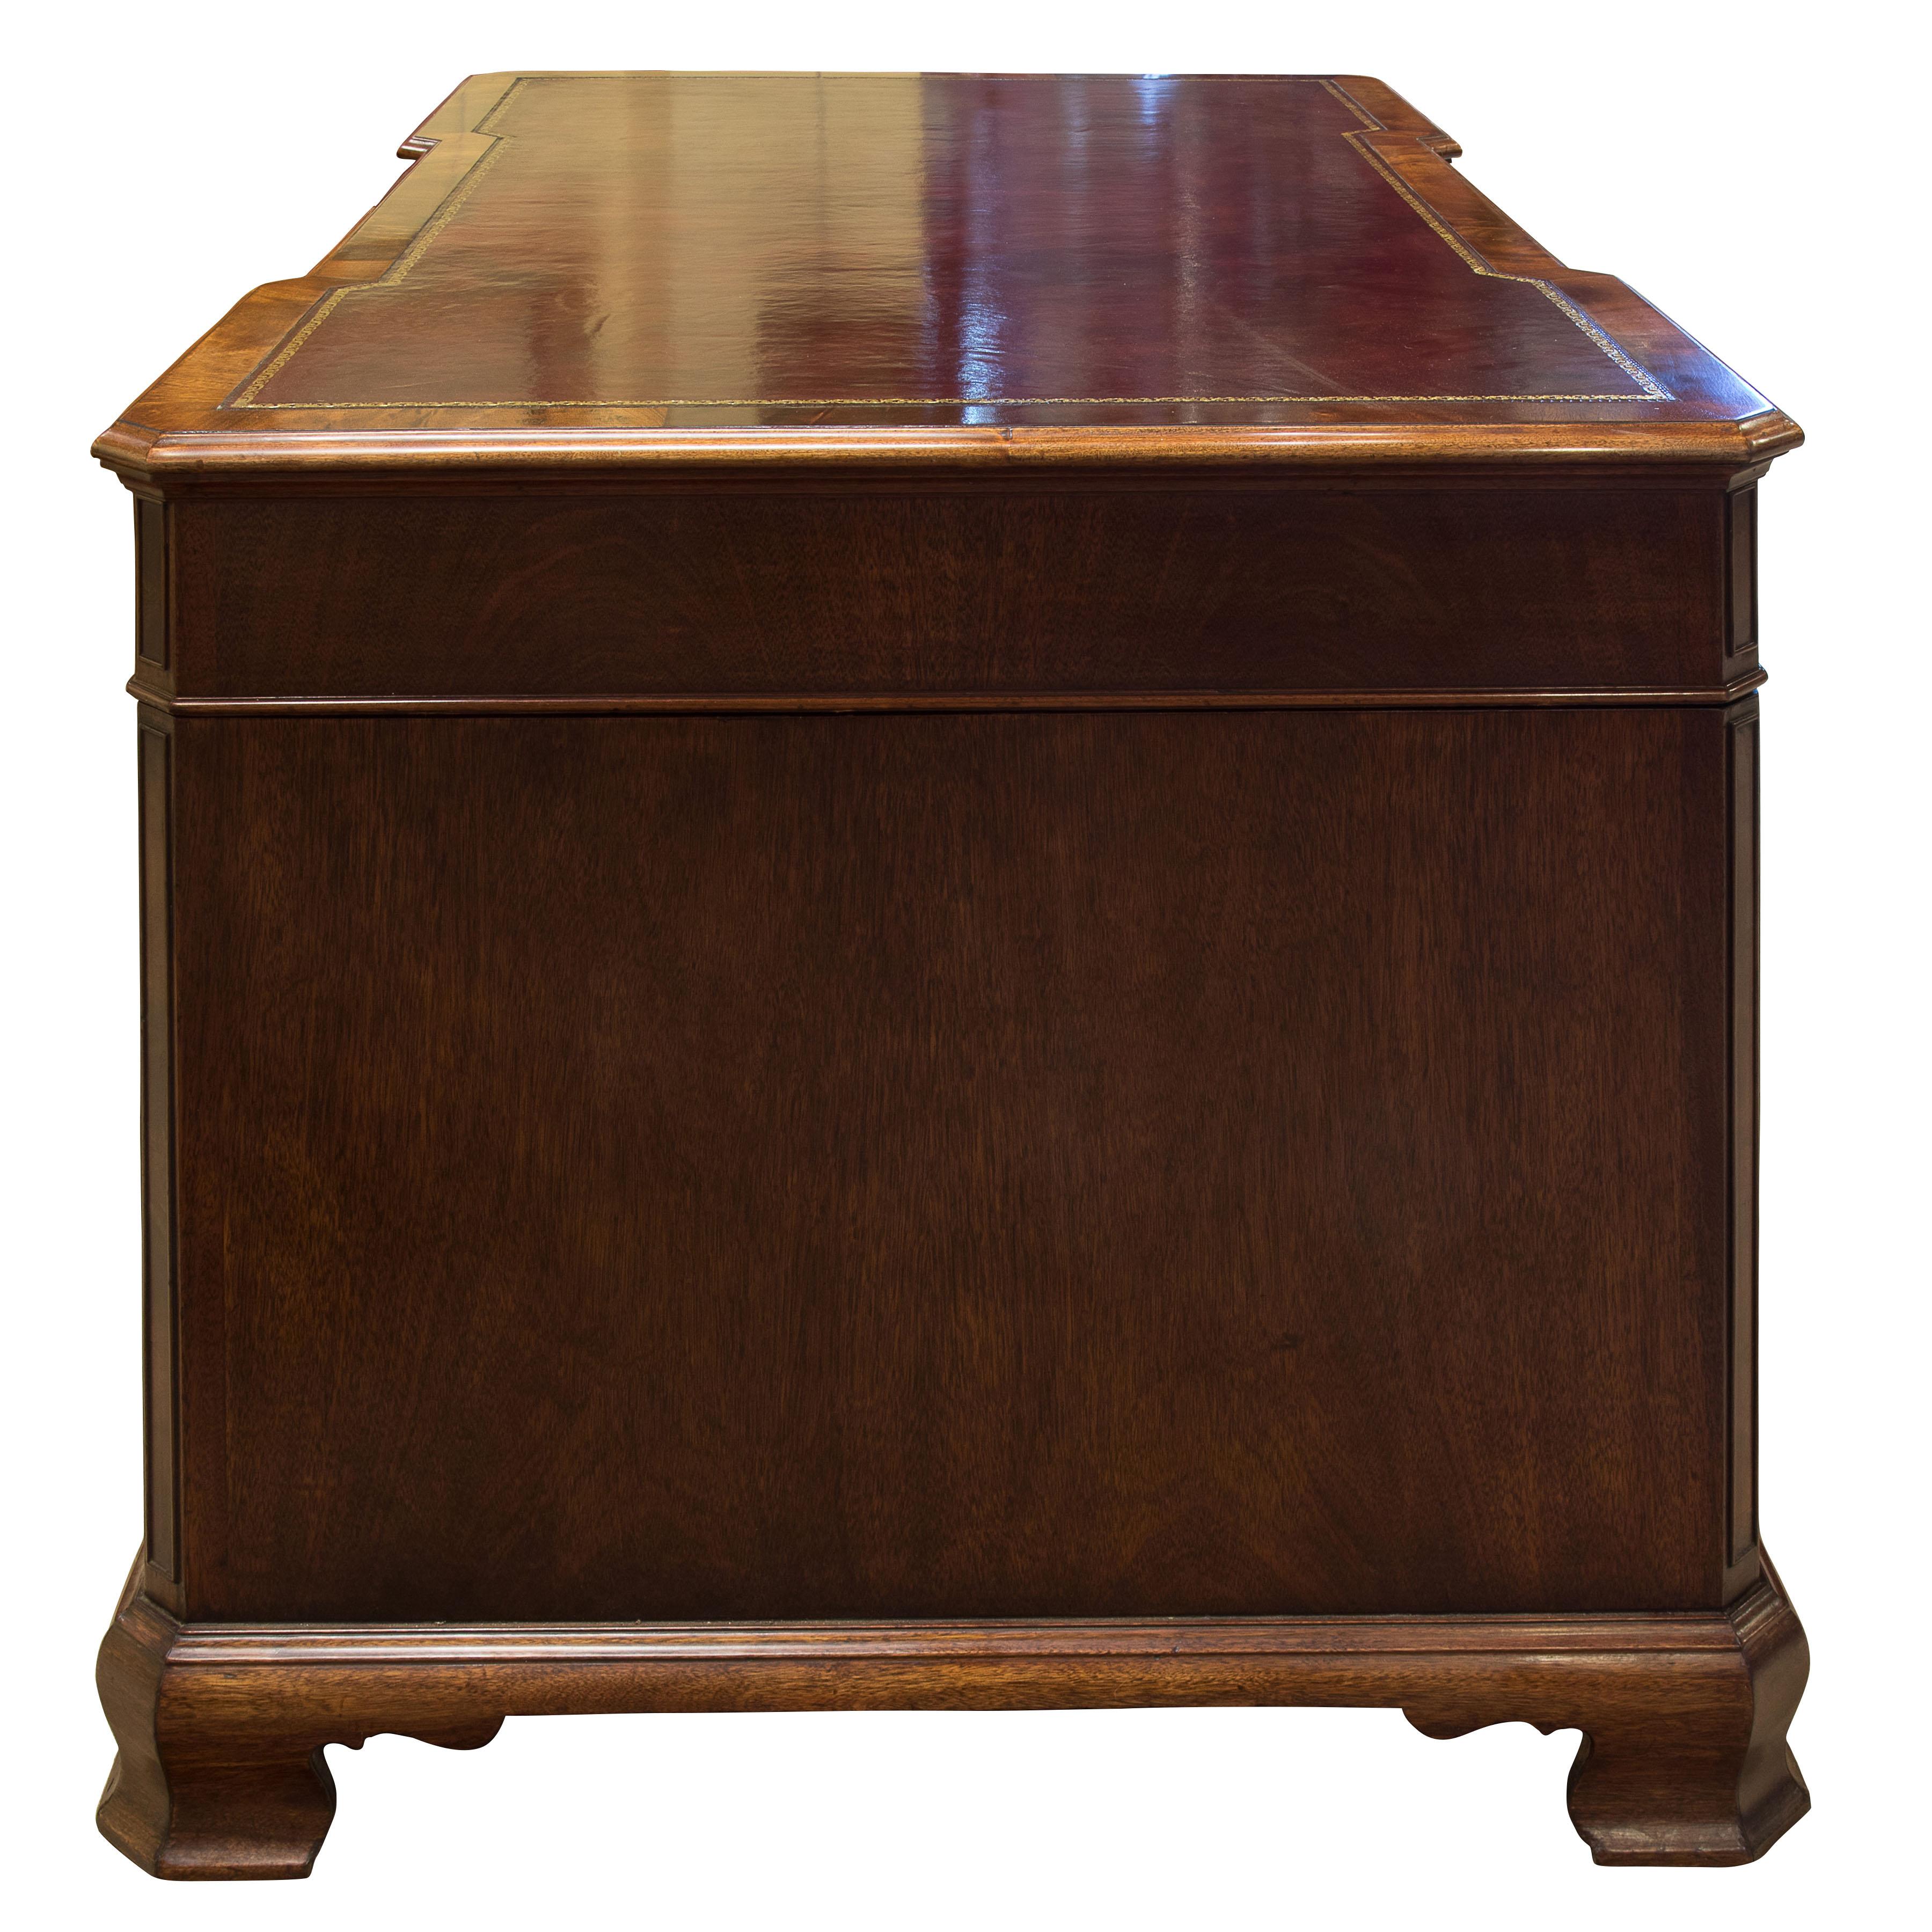 19th century mahogany desk. Inverted breakfront with canted corners shaped bracket feet with skirting reveal. Hand dyed and tooled leather insert,

 

circa 1880.